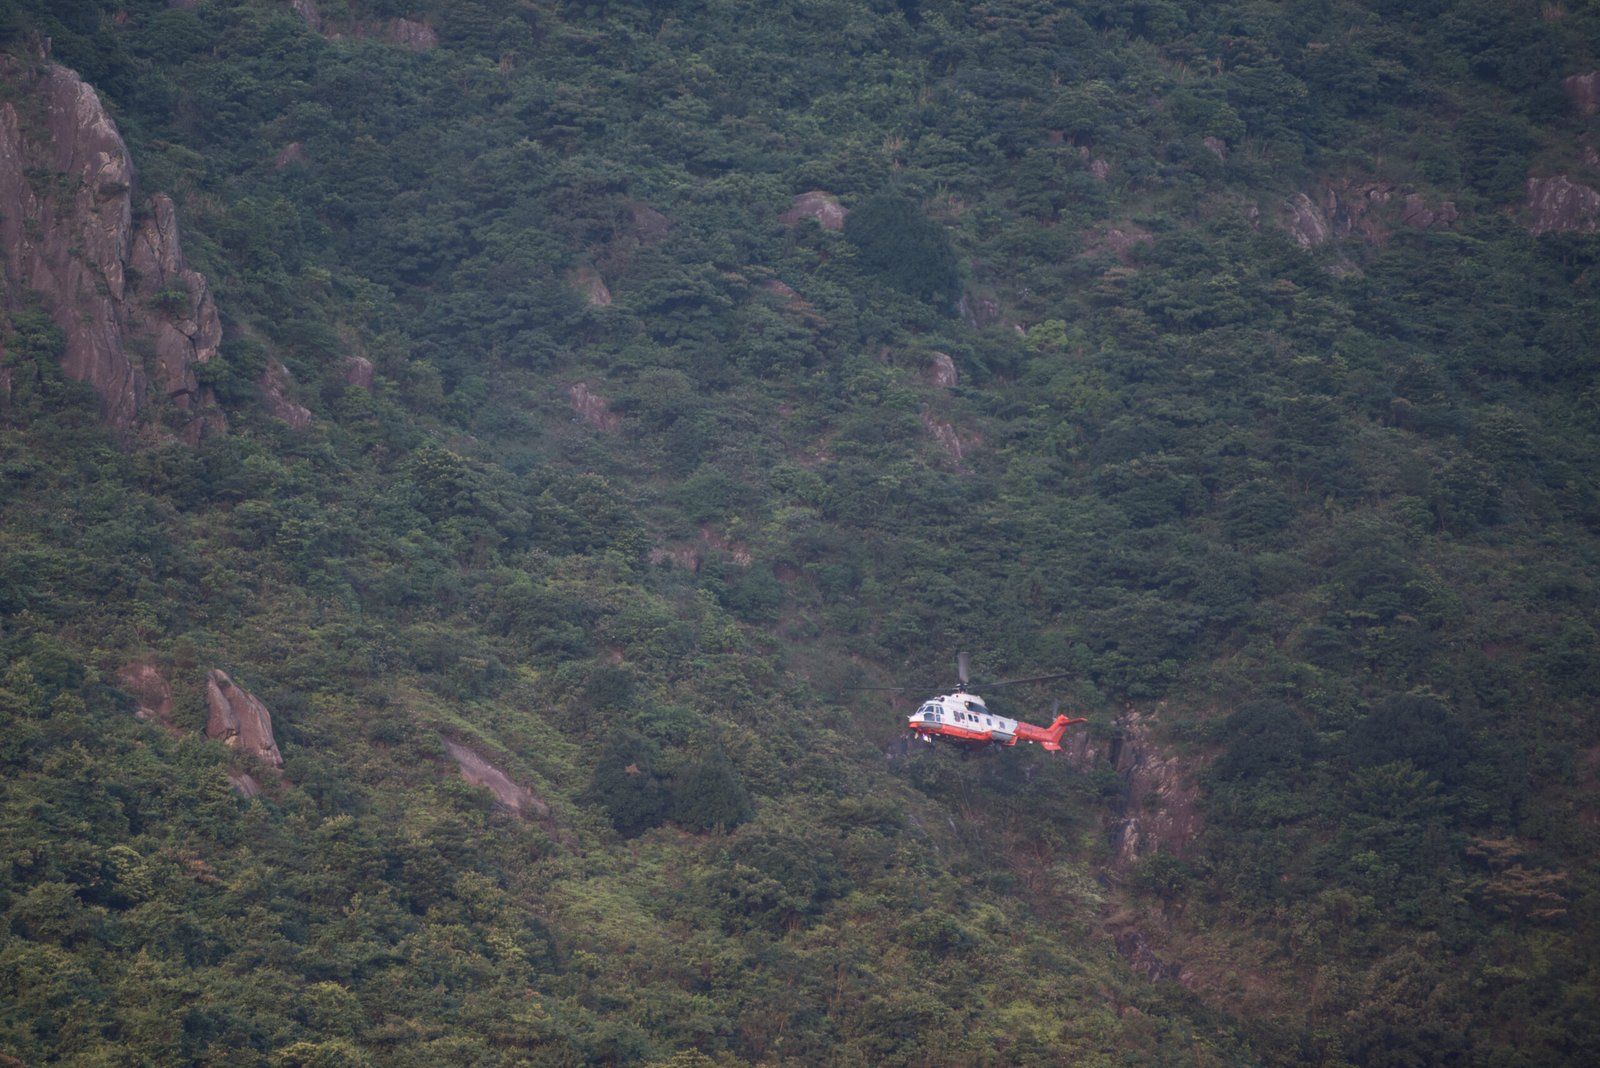 Helicopter rescue in August 2017